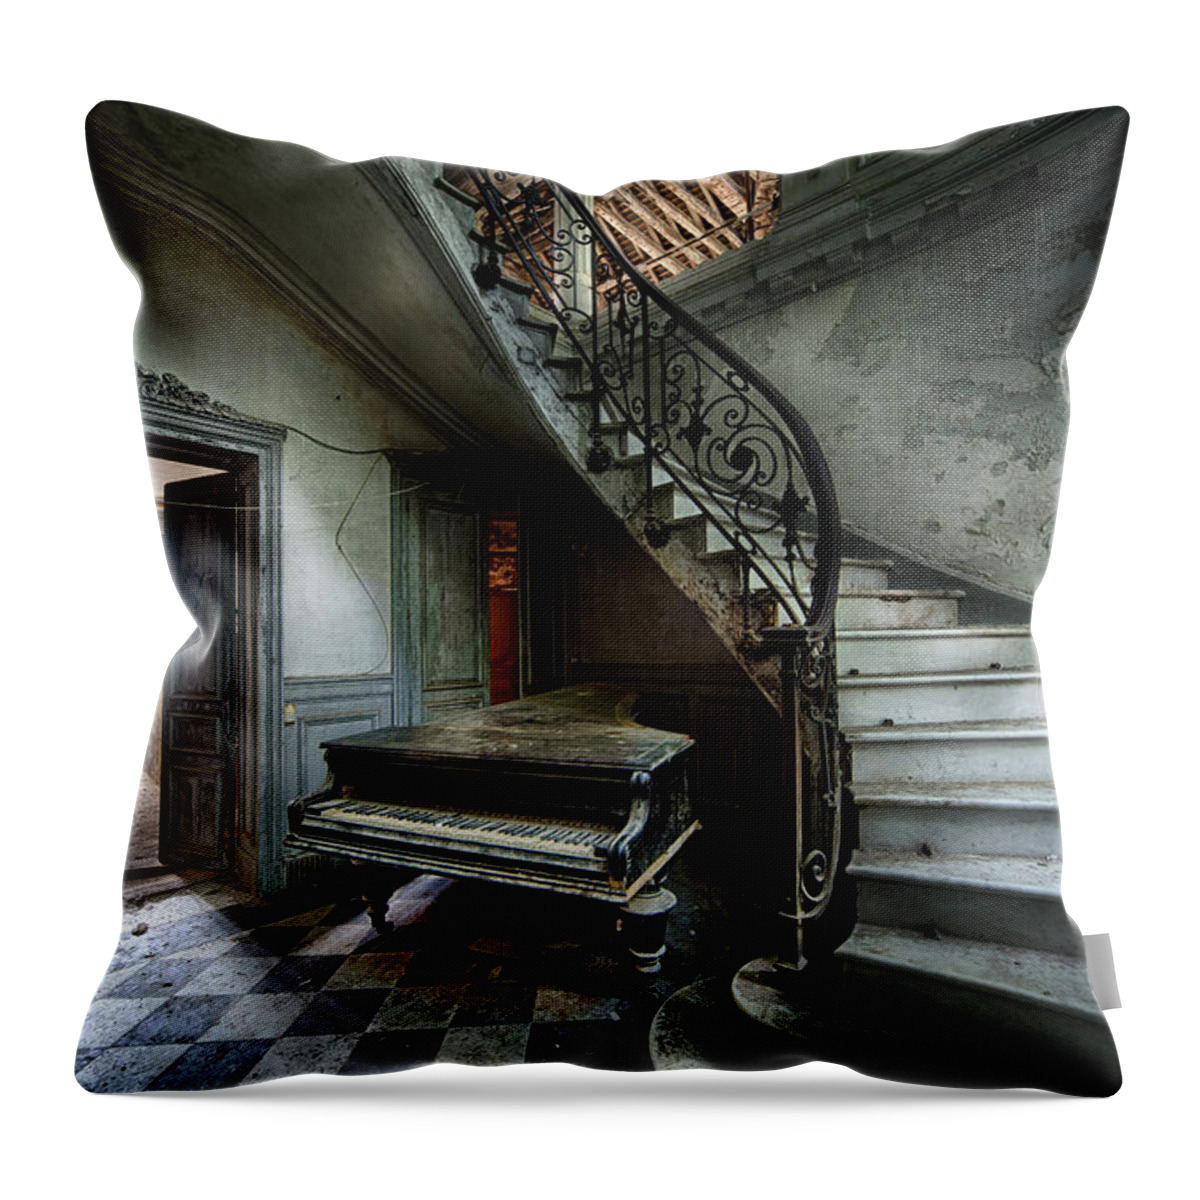 Abandoned Throw Pillow featuring the photograph The sound of decay - abandoned piano by Dirk Ercken